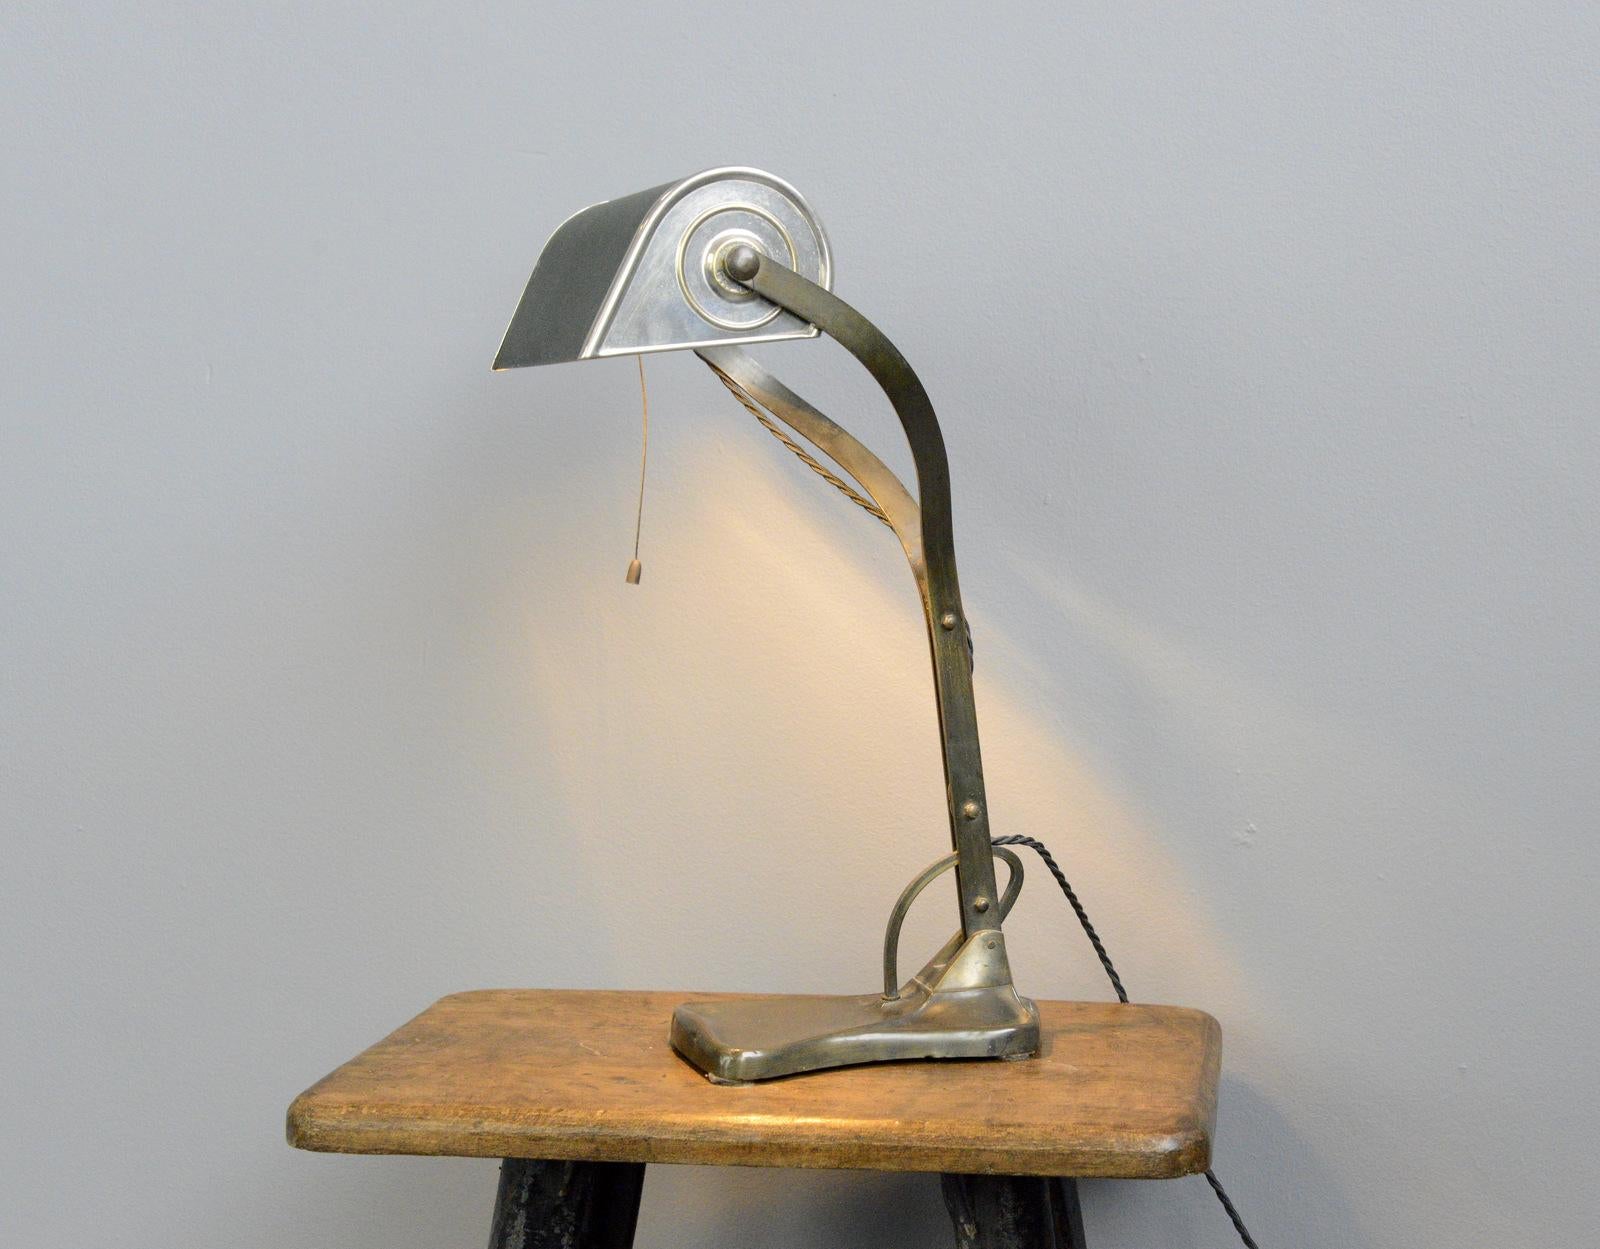 Desk lamp by Robert Pfaffle for Erpees, circa 1920

- Articulated arm and shade
- Copper with olive green shade
- Pull cord on/off switch
- Takes E27 fitting bulbs
- German, circa 1920
- Measures: 45cm tall x 23cm wide x 19cm